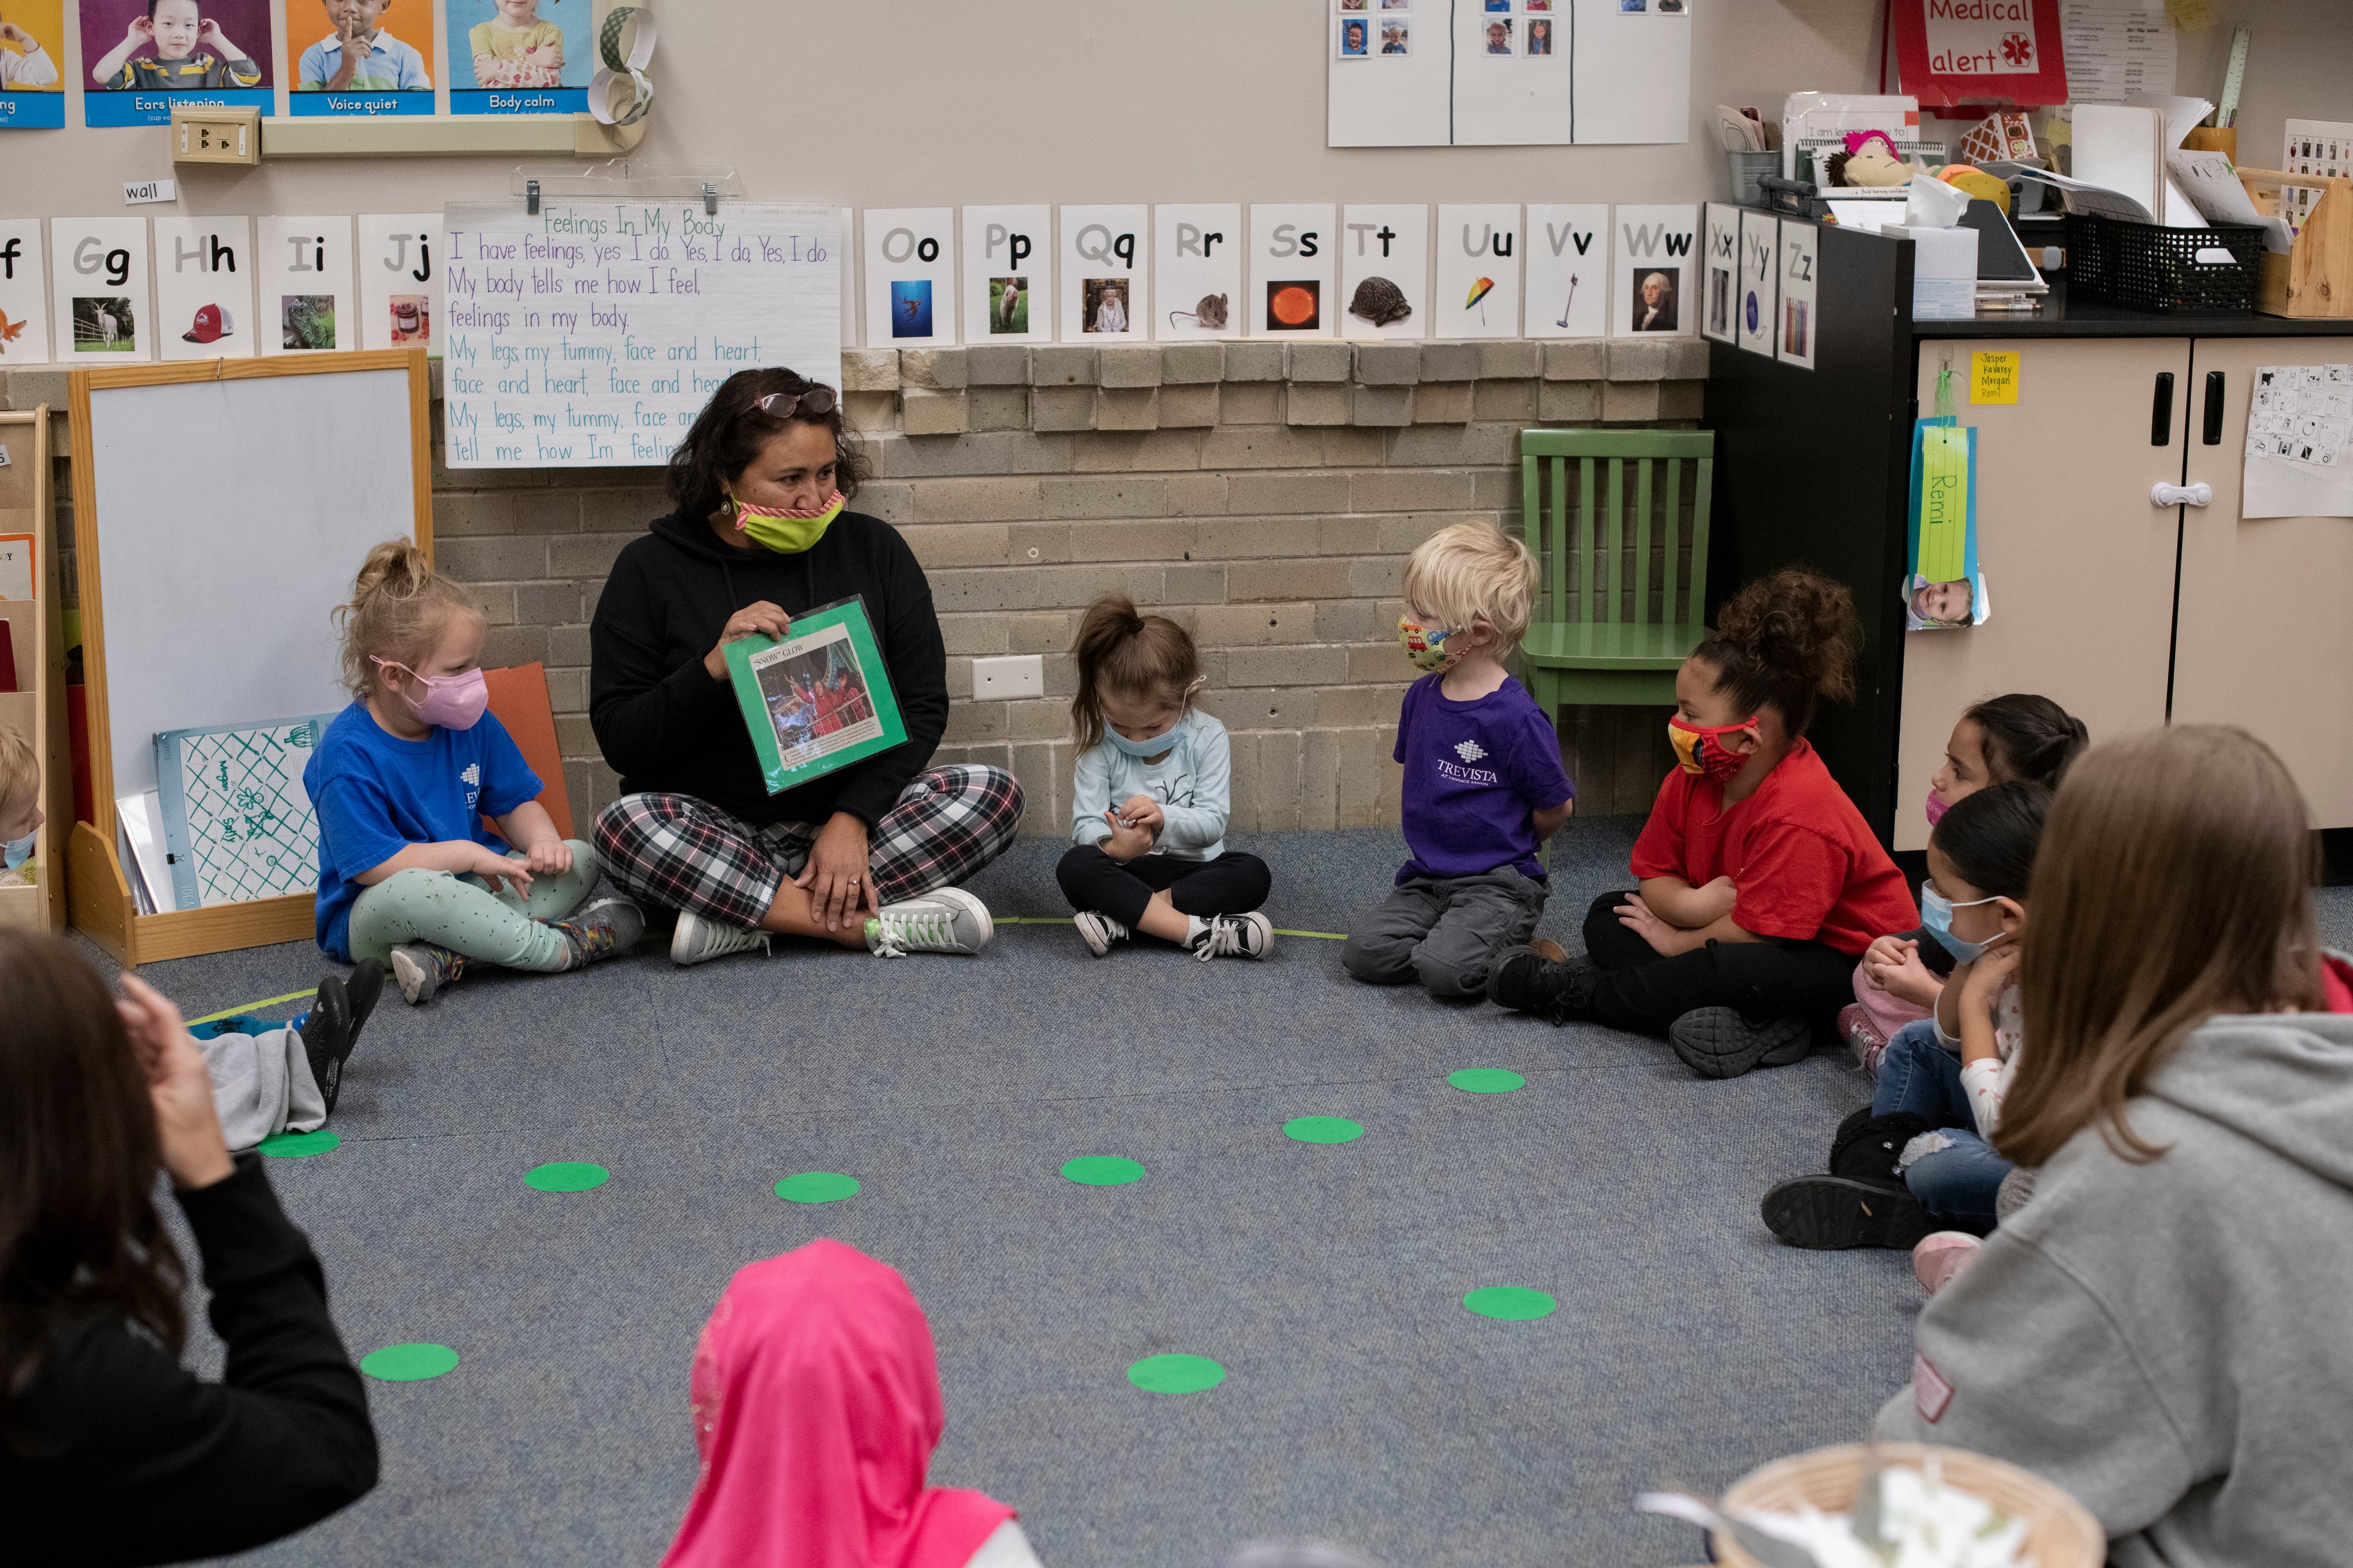 A preschool teacher sits with her students on a carpet lined with green dots, holding a picture as she speaks with the children.